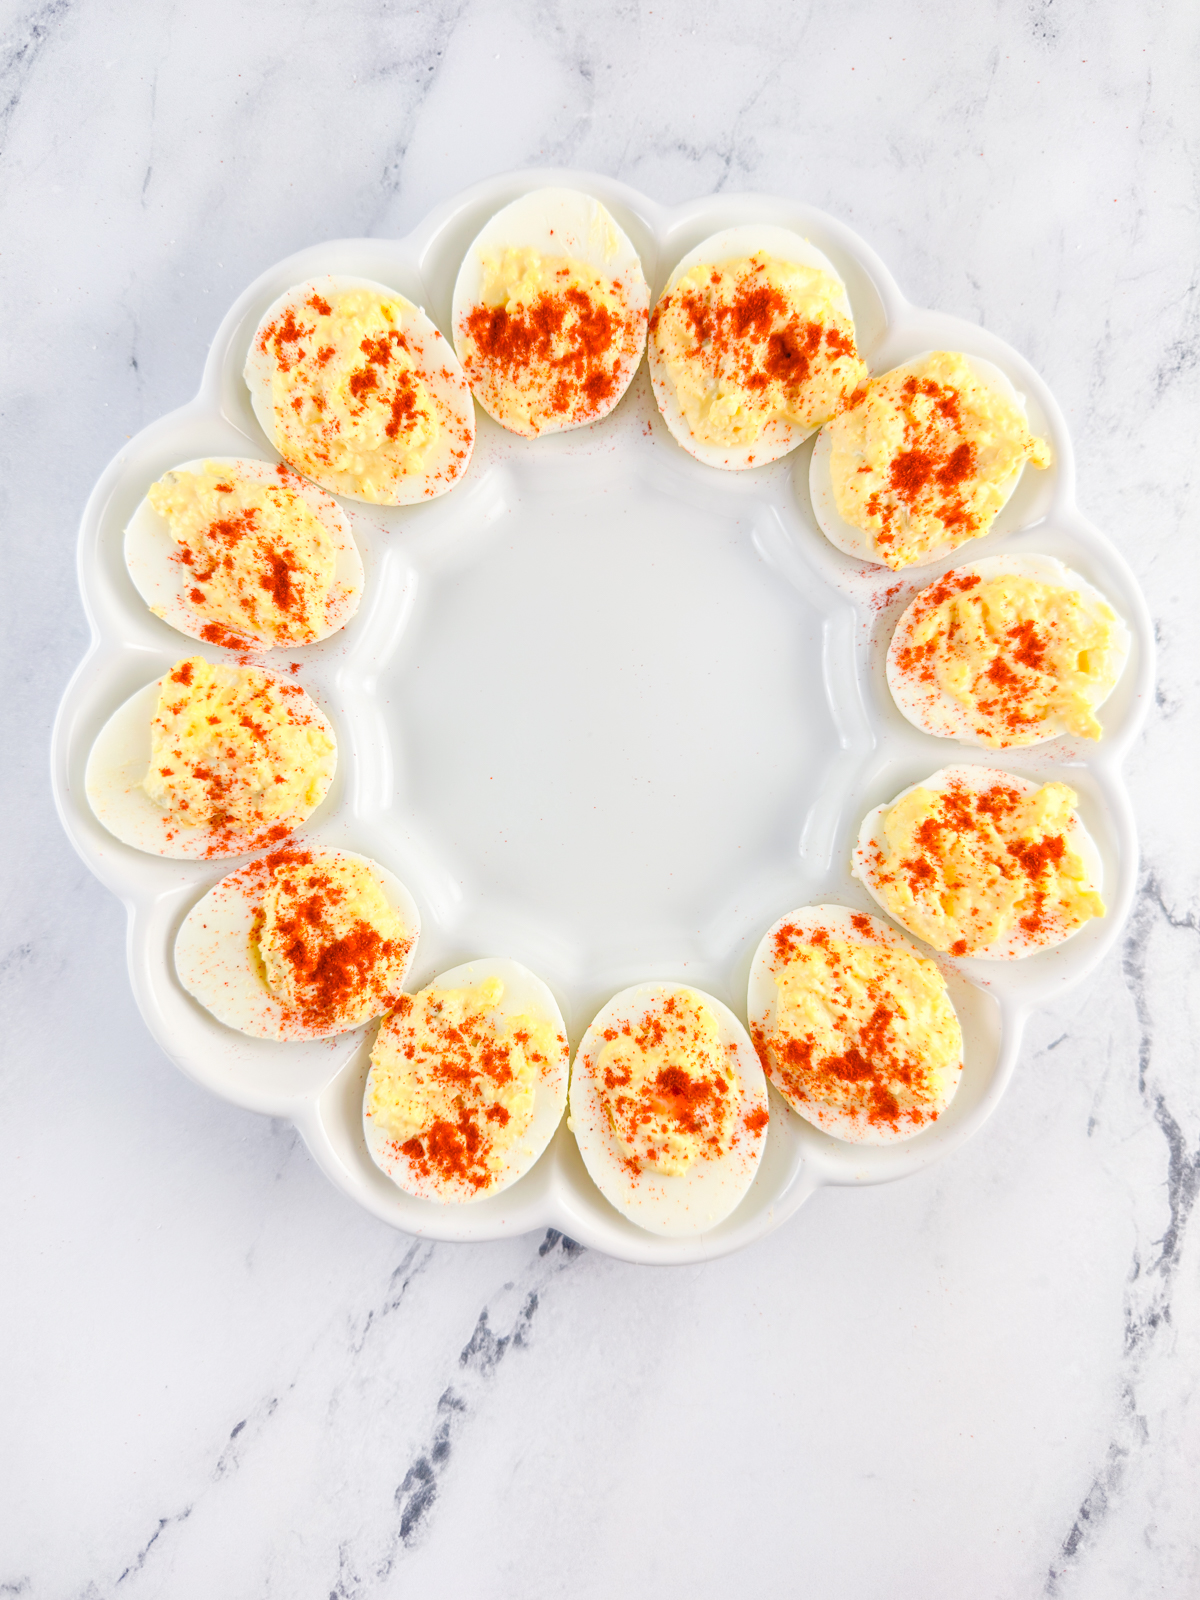 Classic Southern deviled eggs sprinkled with paprika on a serving tray